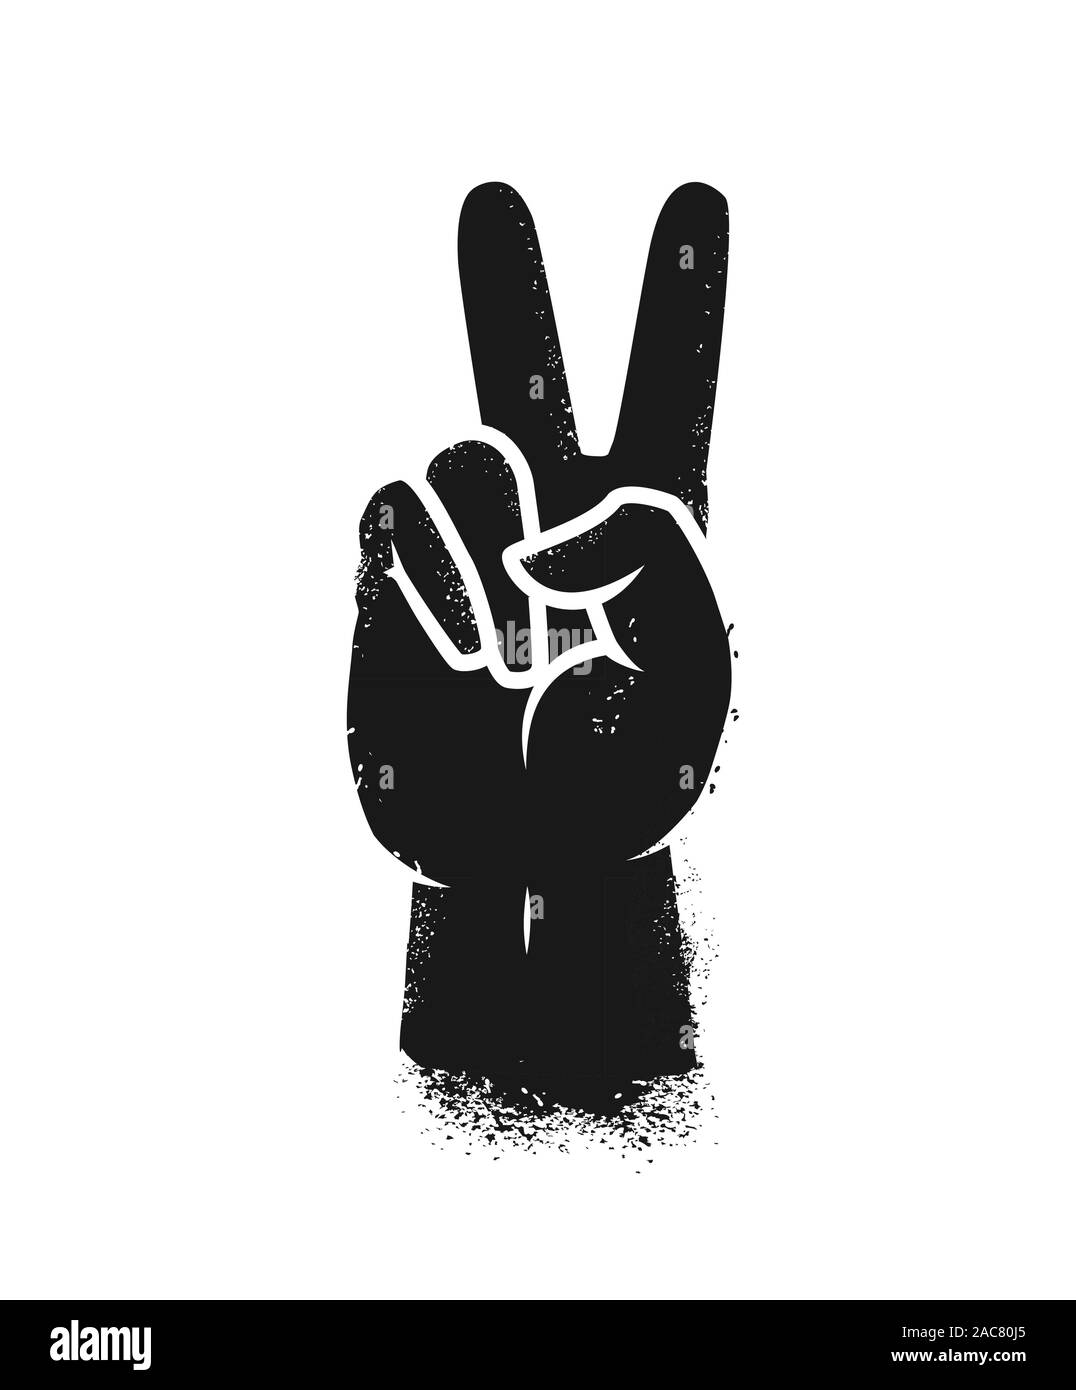 Victory or peace hand gesture symbol. Vector illustration Stock Vector